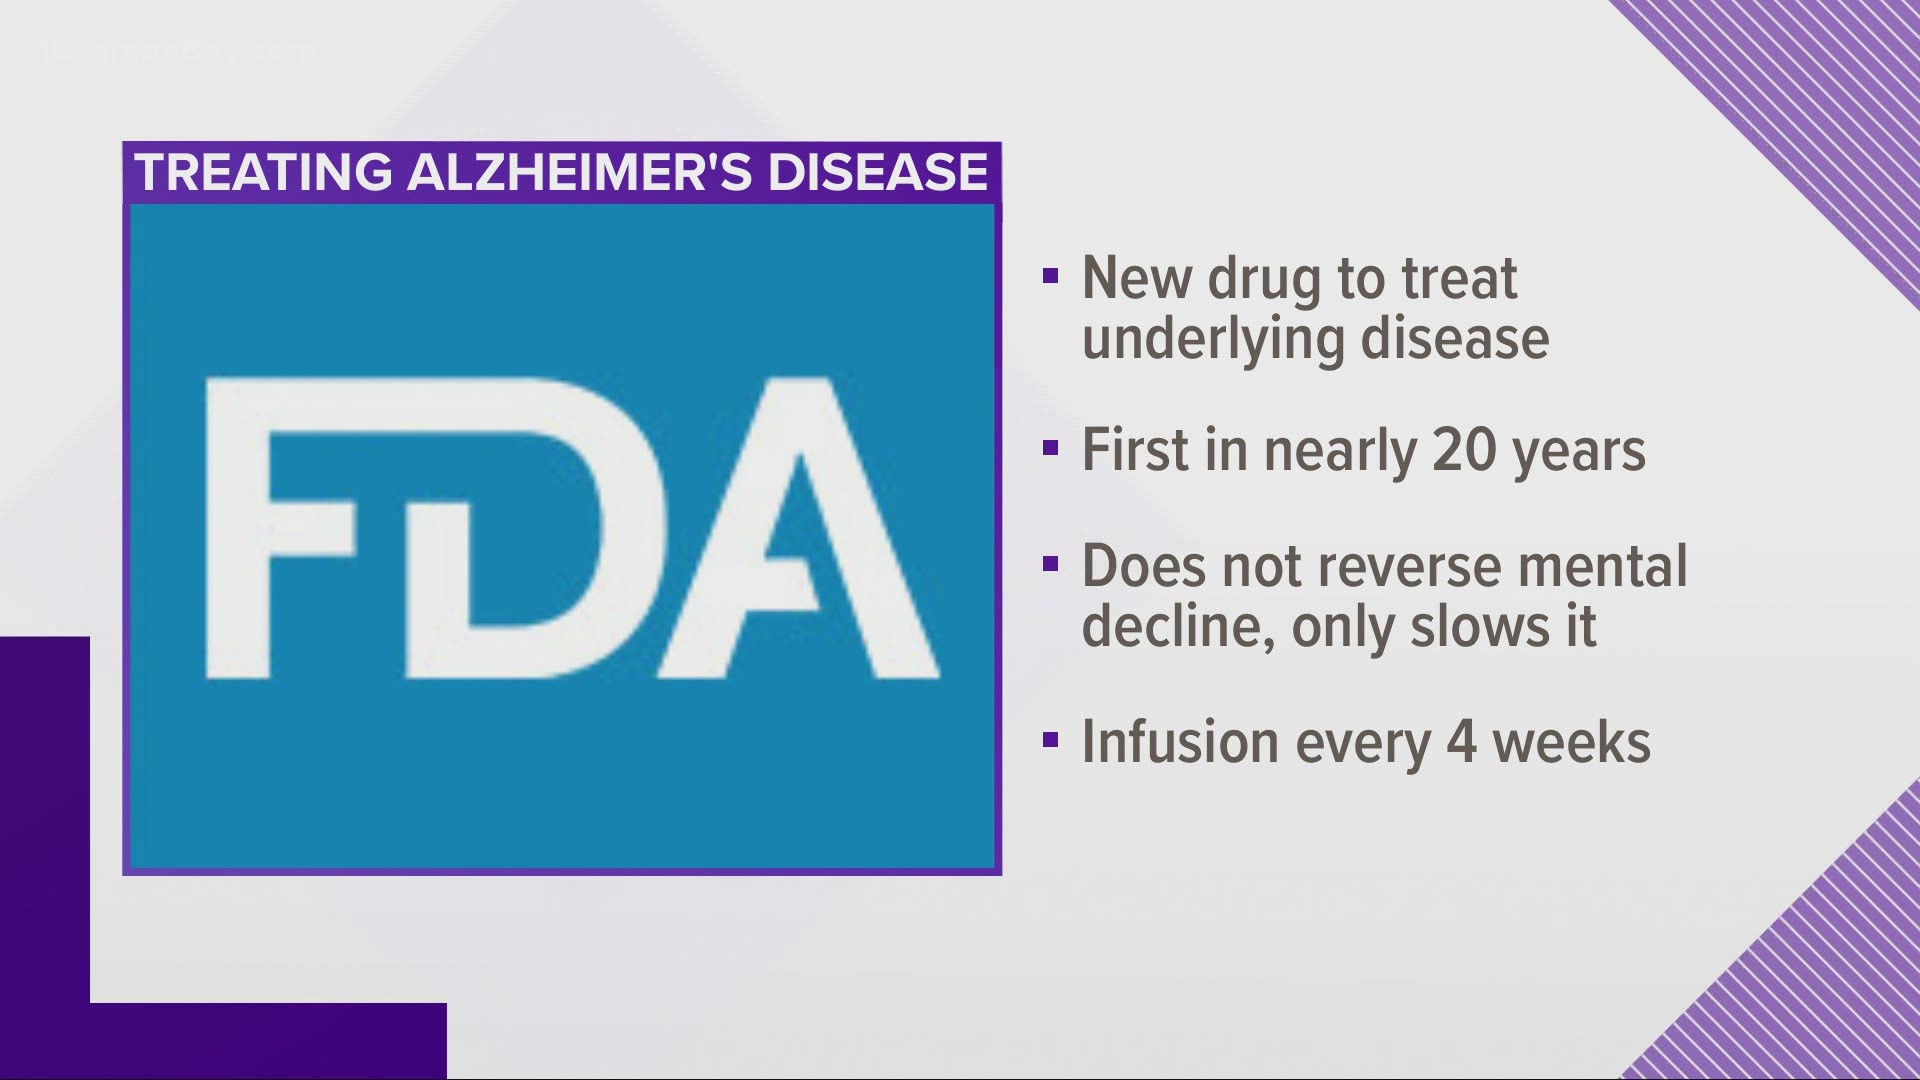 The drug is the first treatment that could potentially reduce the 'clinical decline' of those who have the disease.